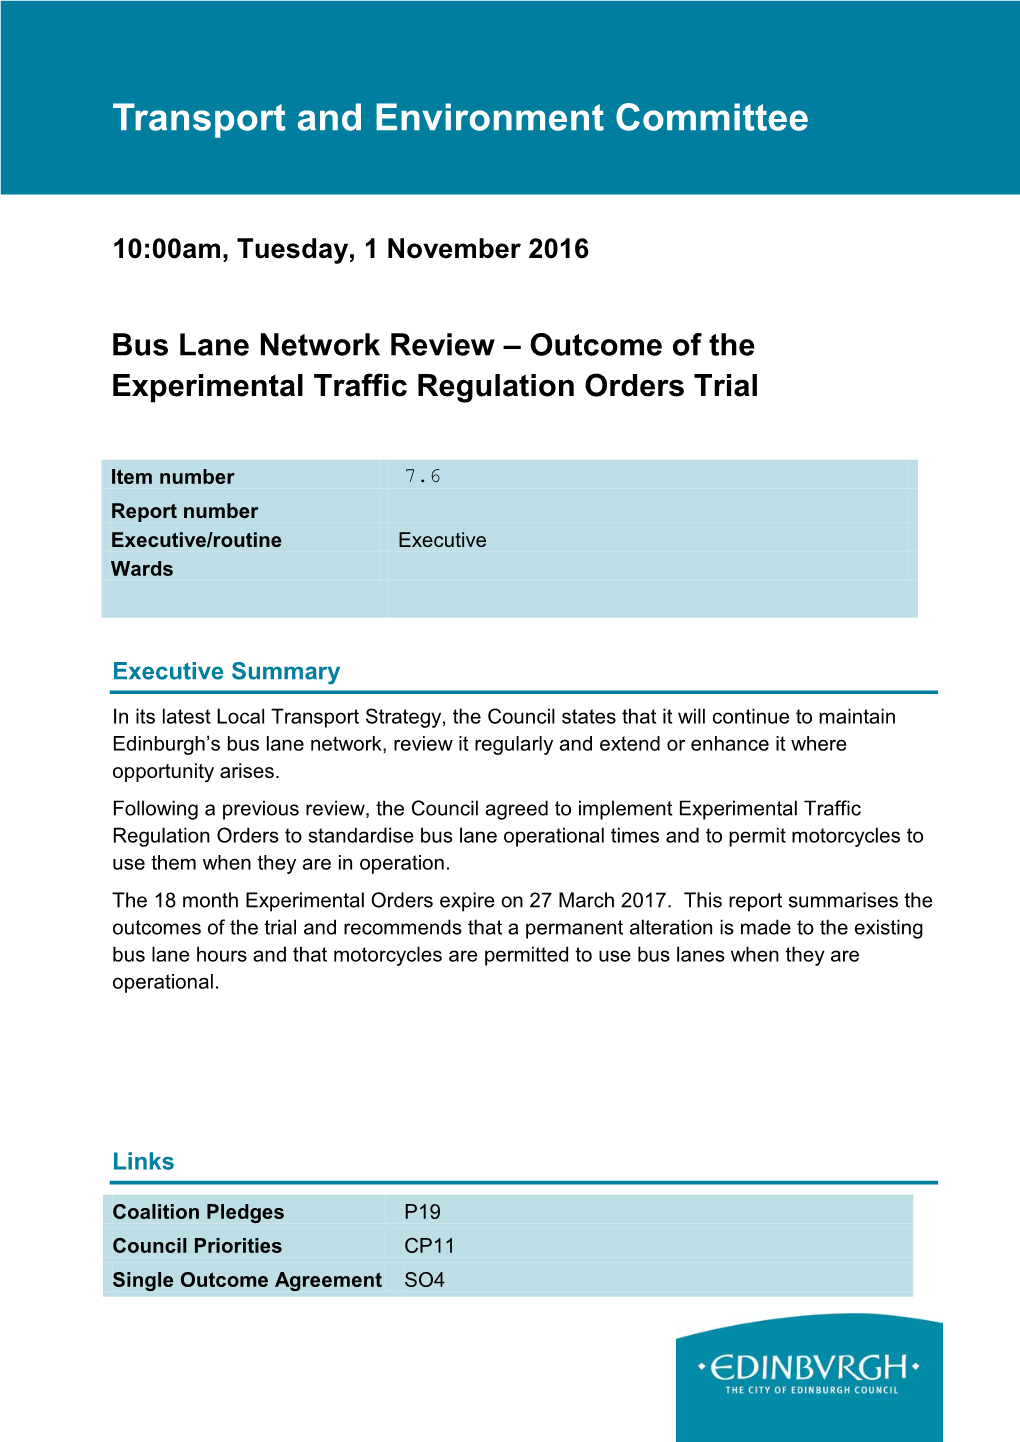 Bus Lane Network Review – Outcome of the Experimental Traffic Regulation Orders Trial